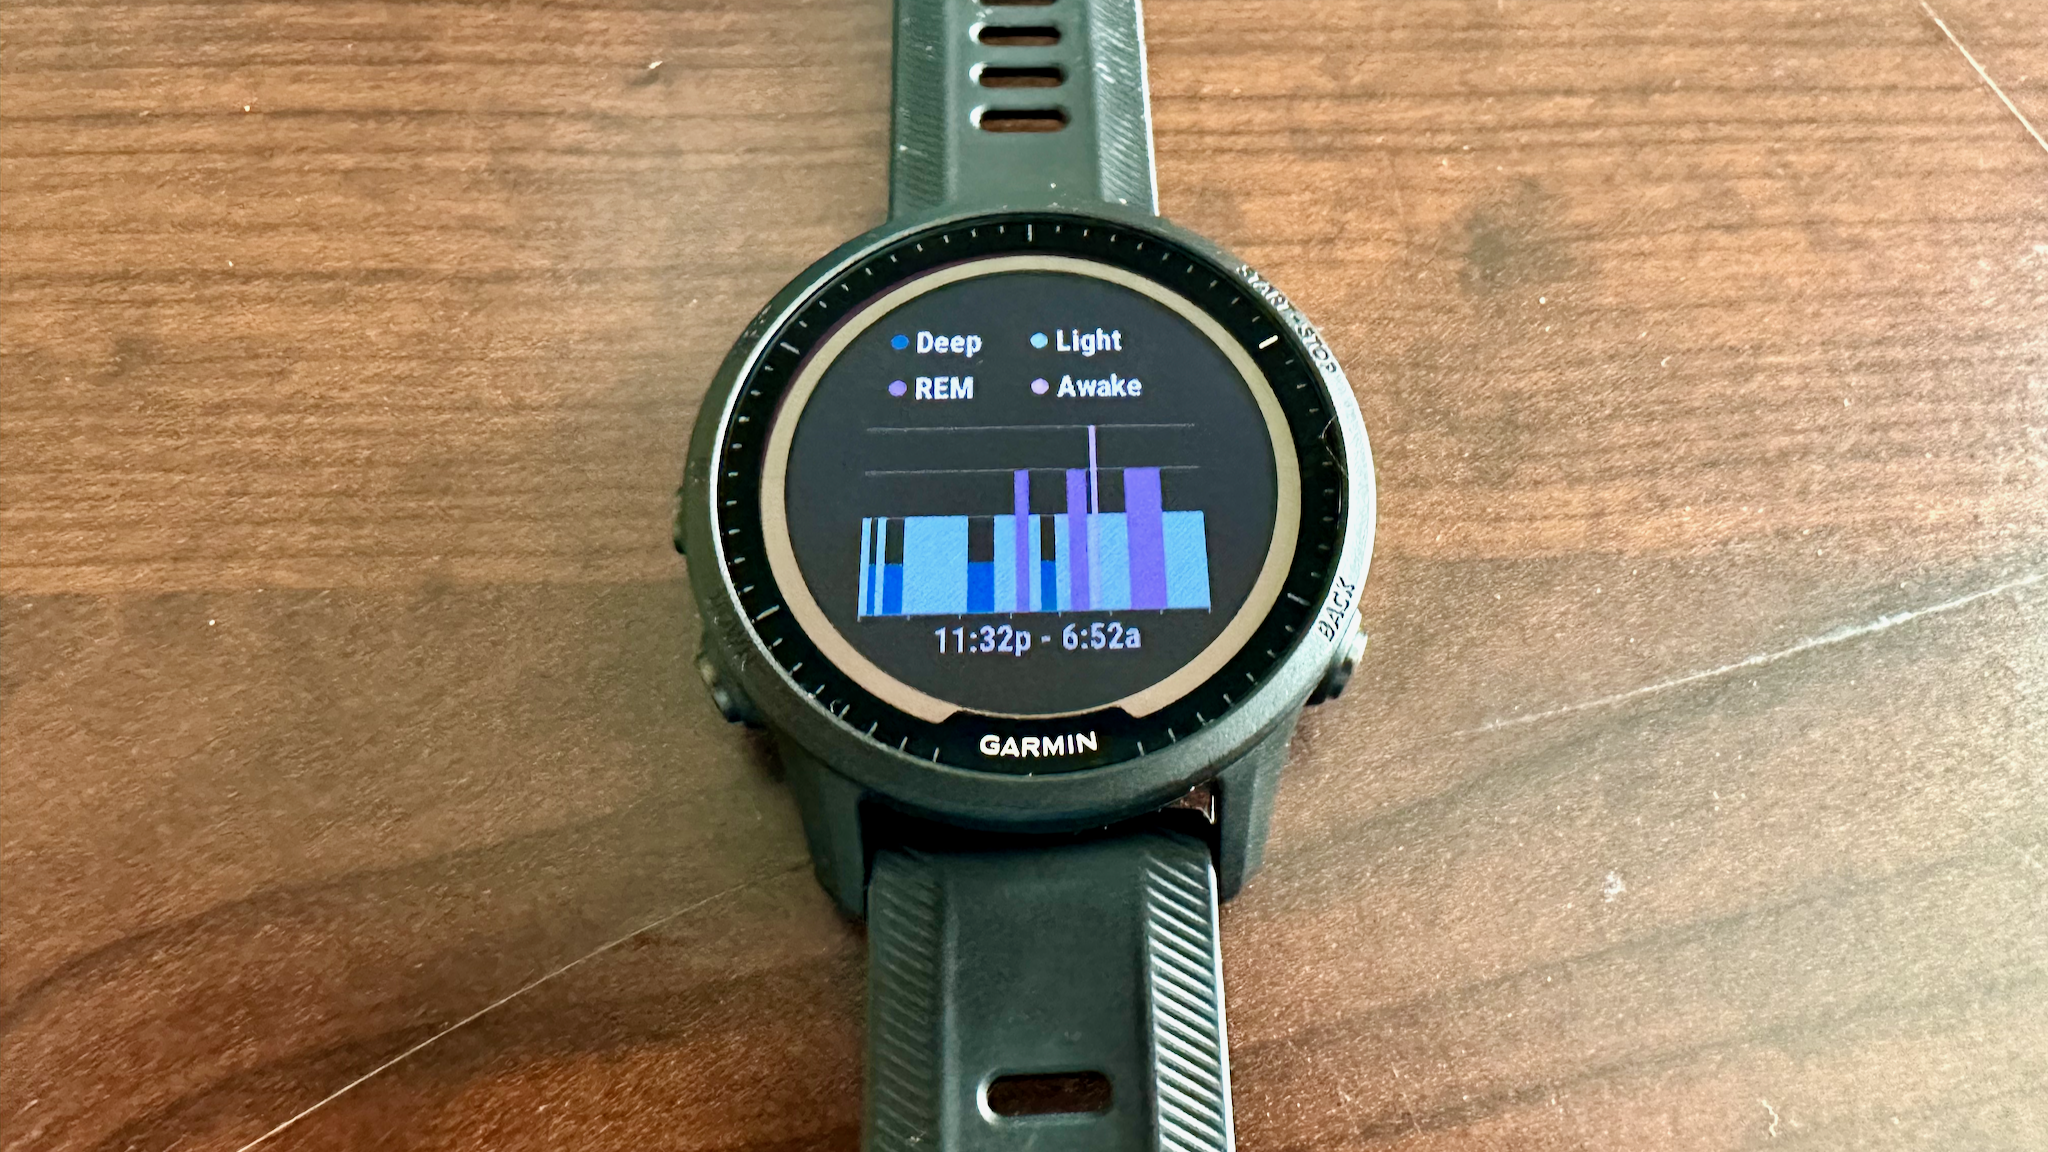 How to sleep mode on a Garmin watch Android Central